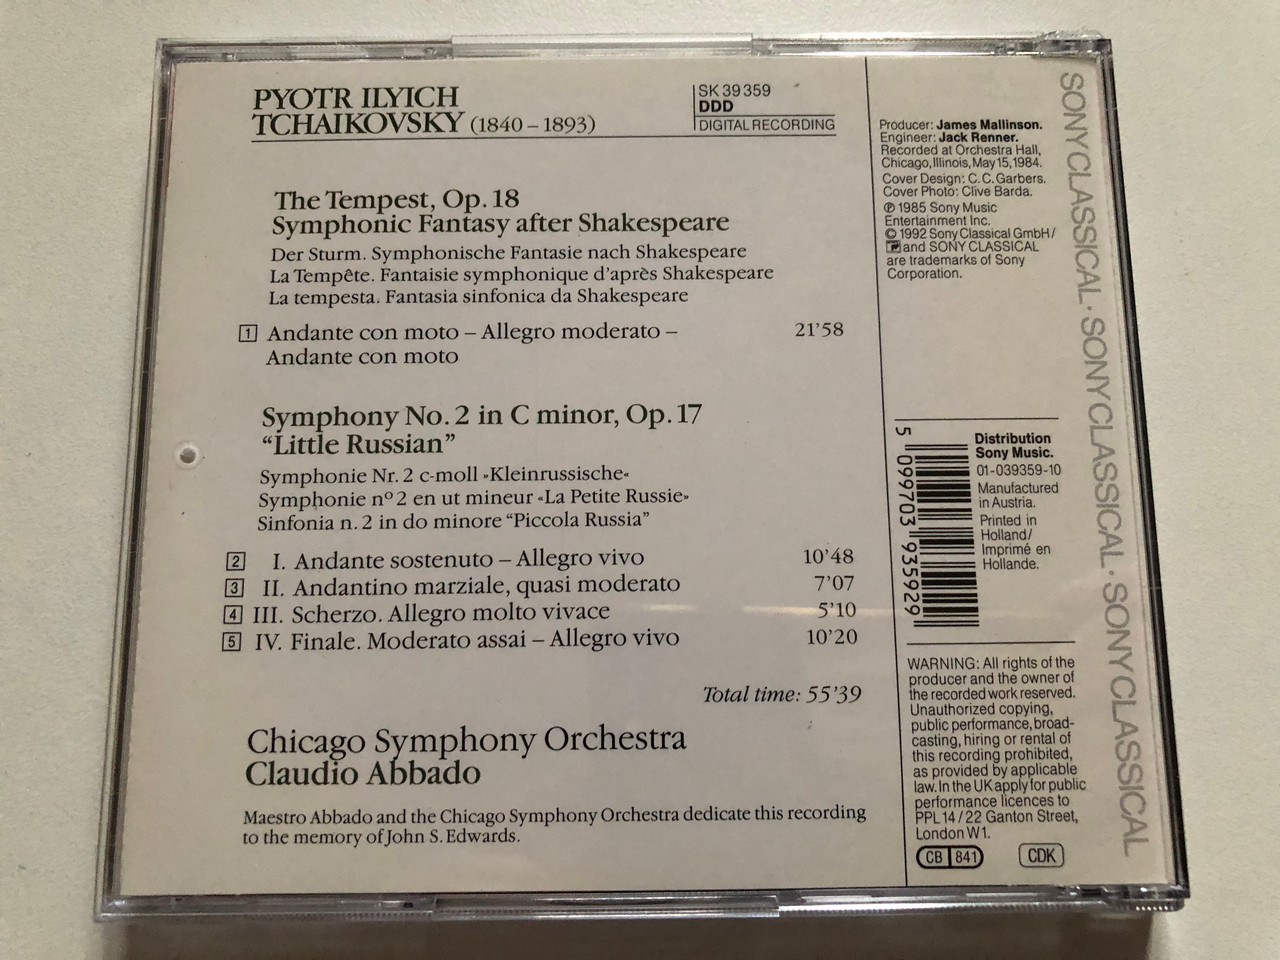 https://cdn10.bigcommerce.com/s-62bdpkt7pb/products/0/images/313094/Tchaikovsky_-_Symphony_No._2_in_C_minor_Op17_Little_Russian_The_Tempest_-_Chicago_Symphony_Orchestra_Claudio_Abbado_Sony_Classical_Audio_CD_1992_SK_39_359_2__92968.1700489951.1280.1280.JPG?c=2